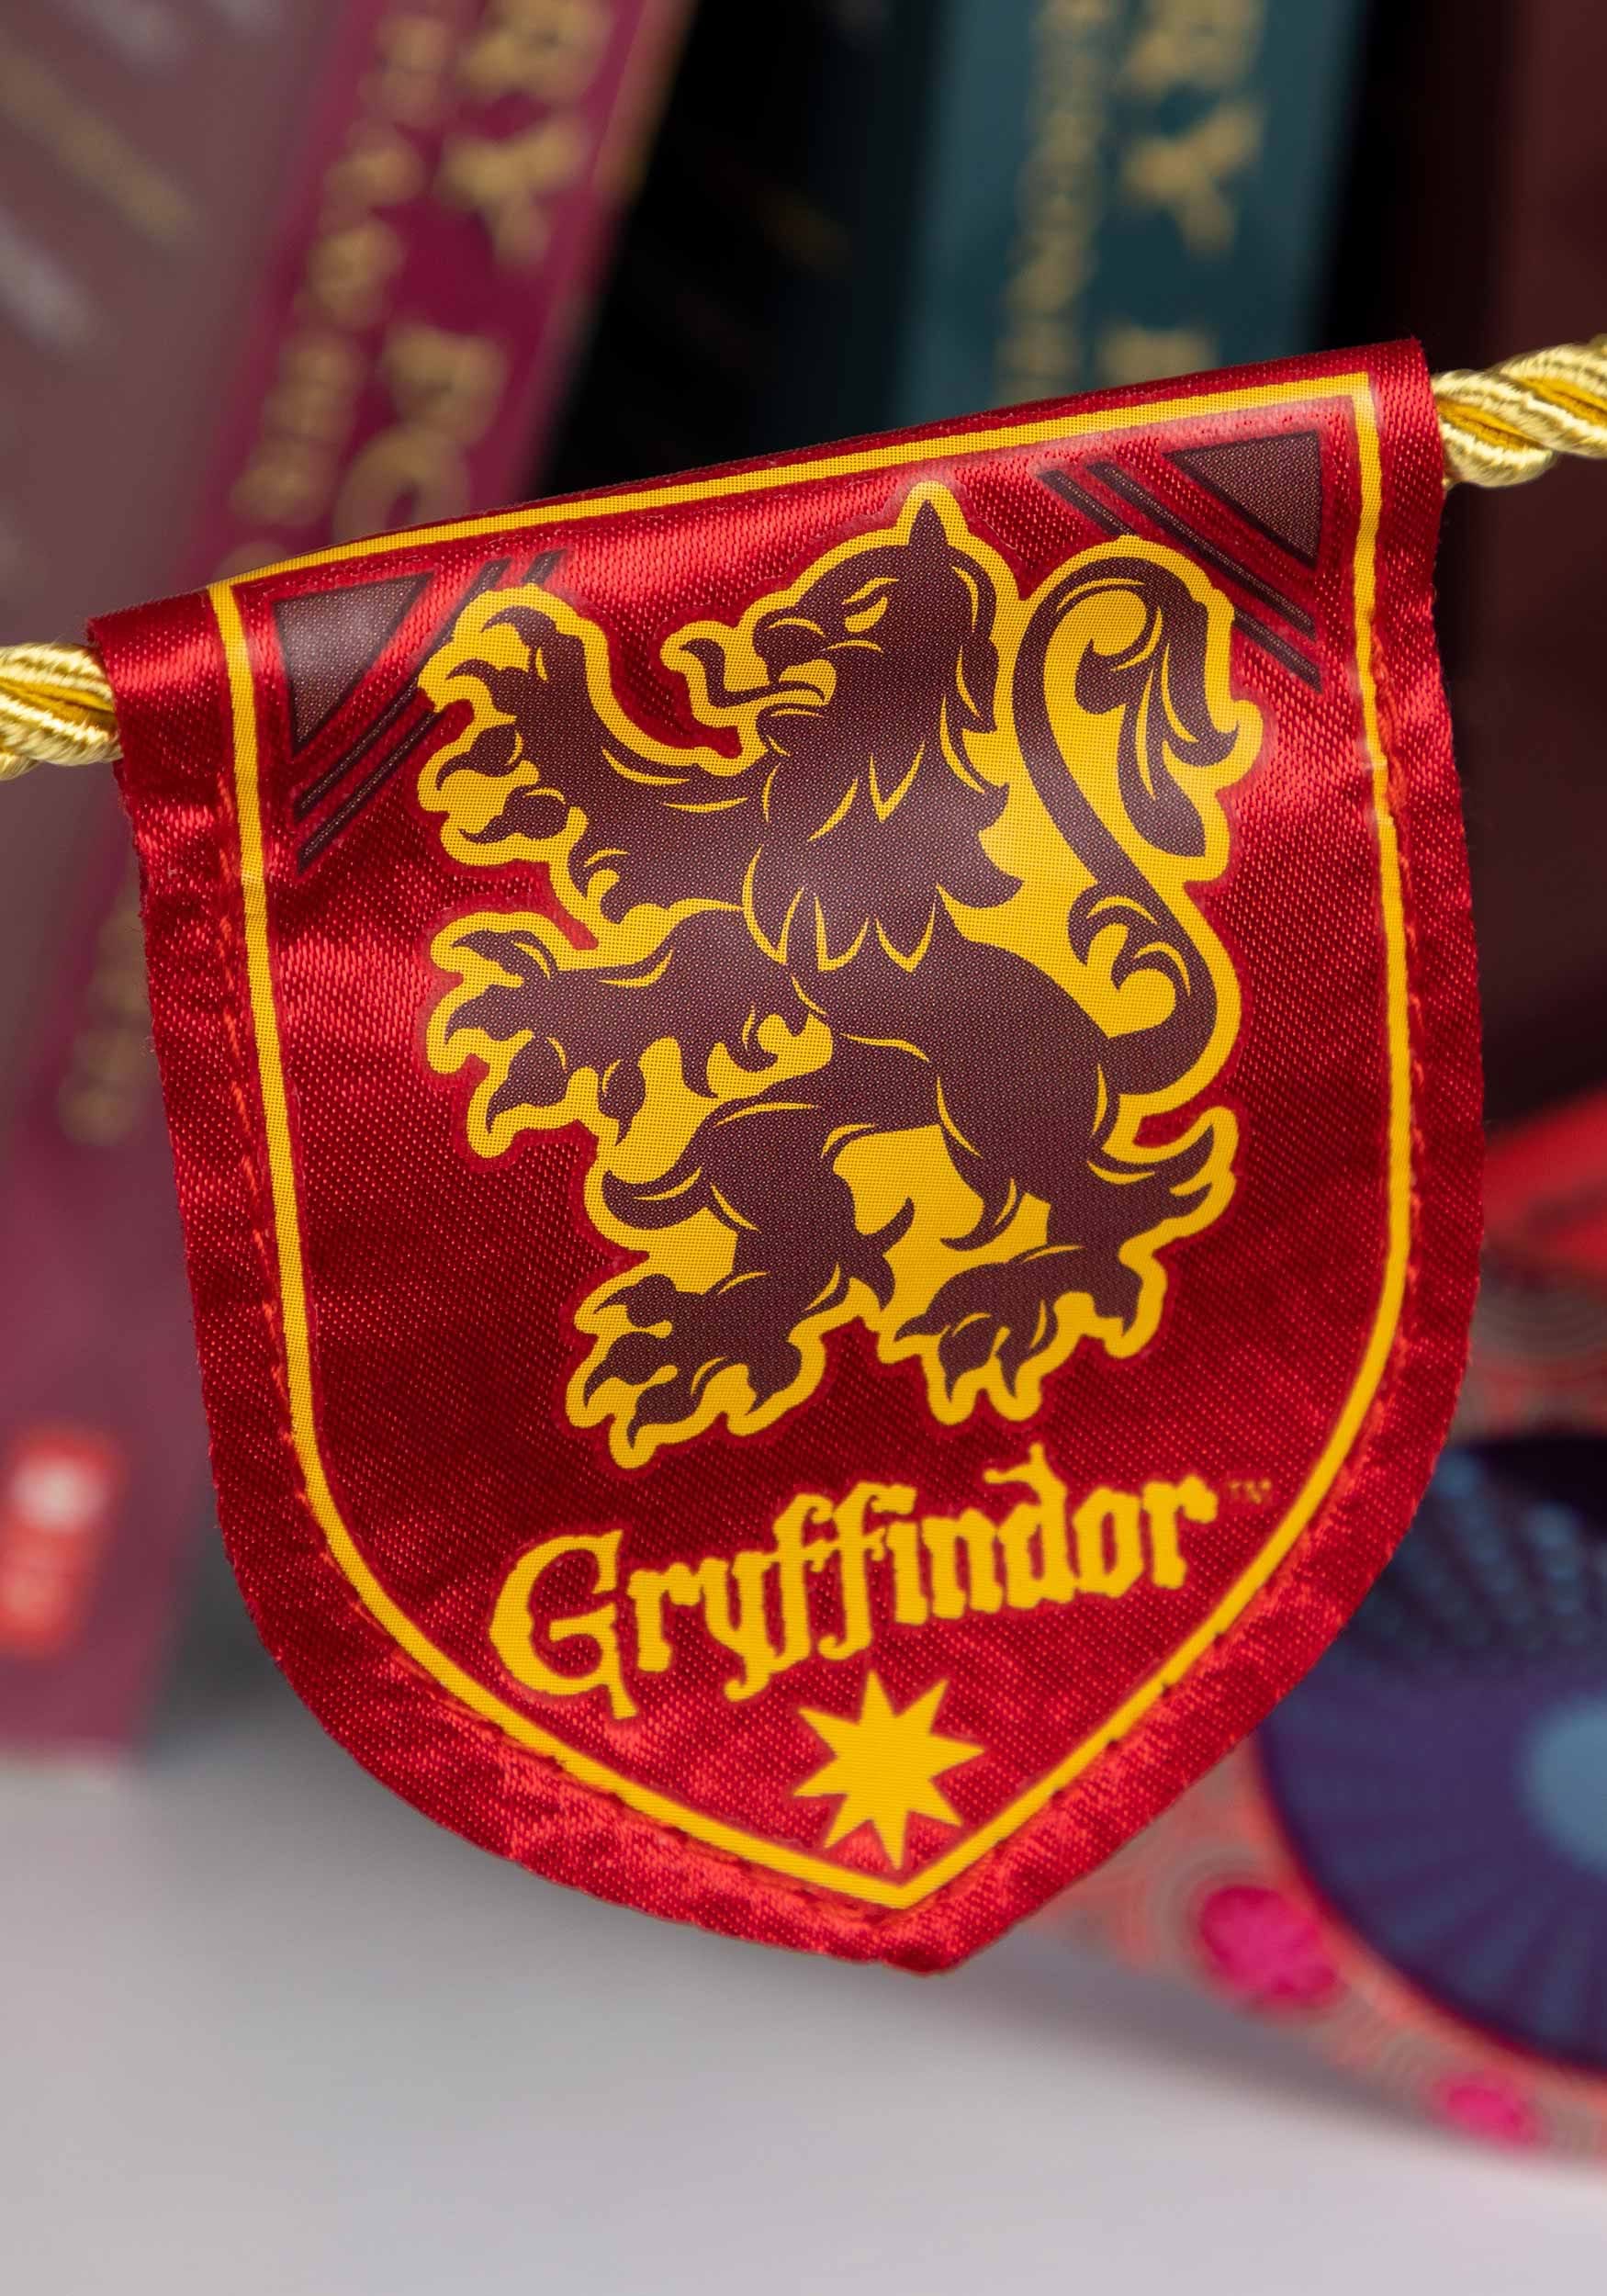 Harry Potter Gryffindor House Banner - Entertainment Earth